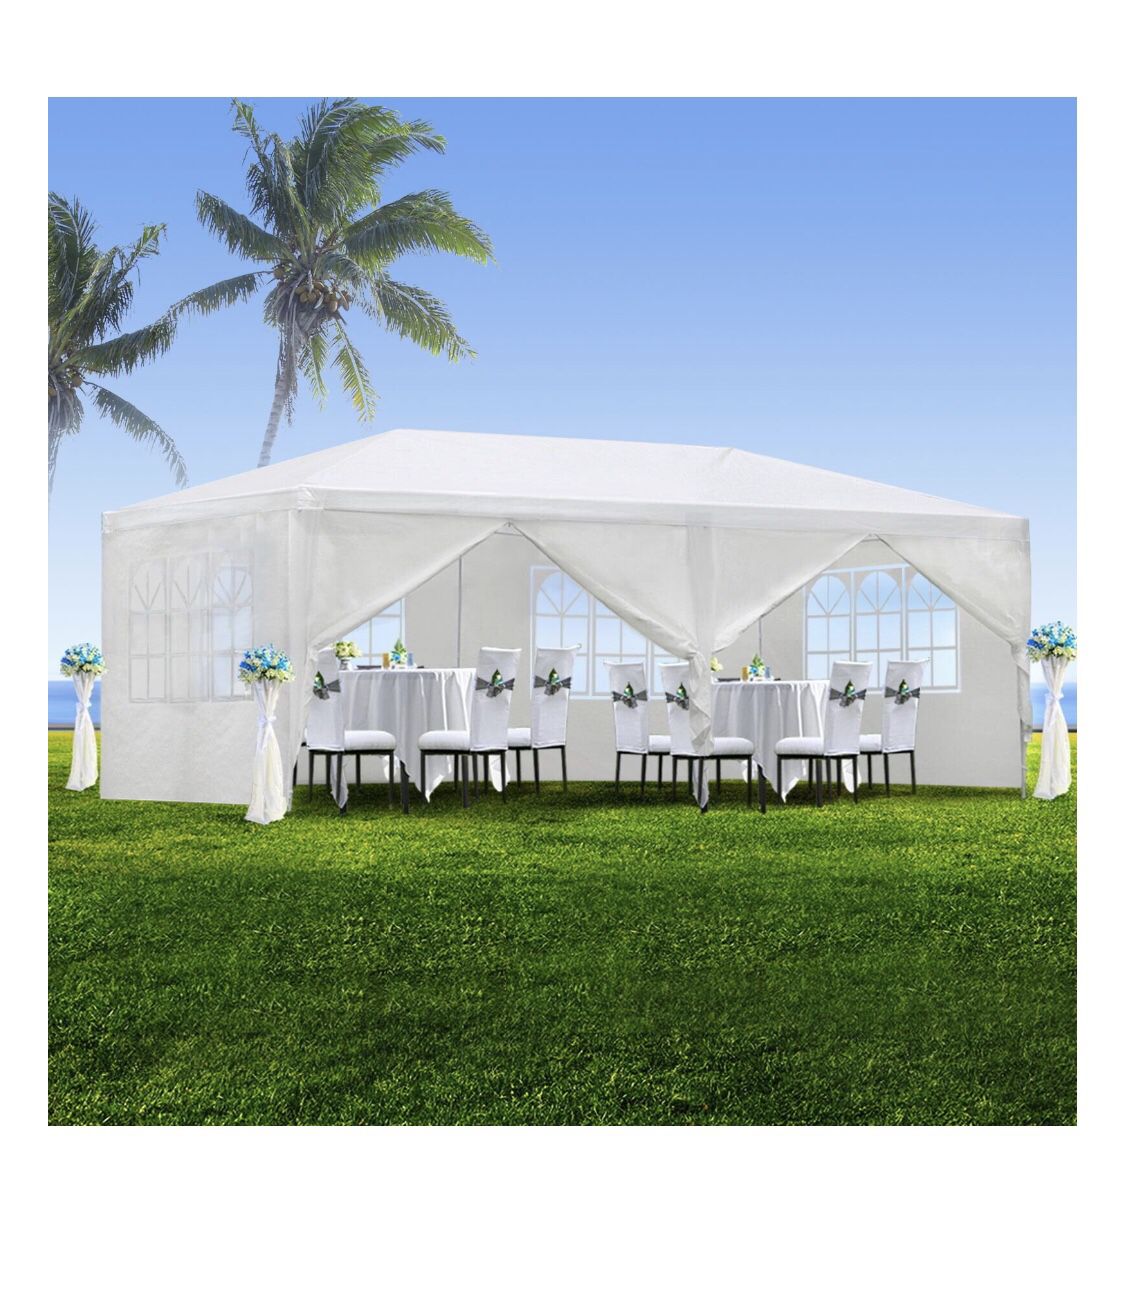 10'x20' Outdoor Canopy Party Wedding Tent White Gazebo Pavilion with6 Side Walls